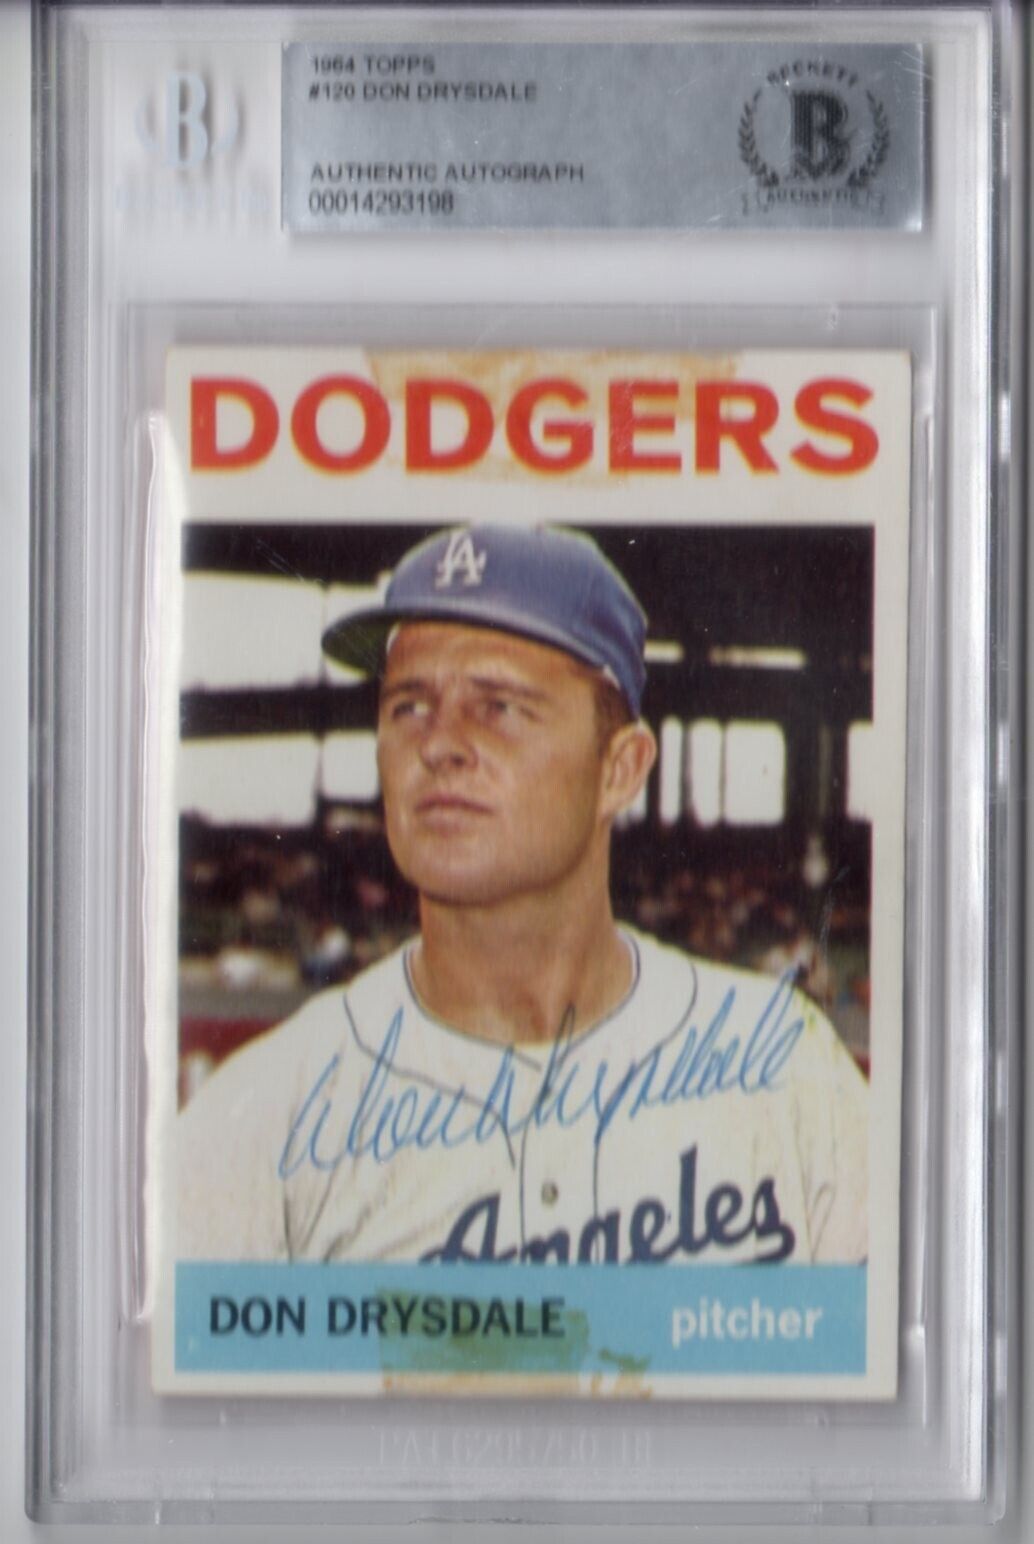 1964 TOPPS DON DRYSDALE AUTOGRAPH  BECKETT AUTHENTICATED